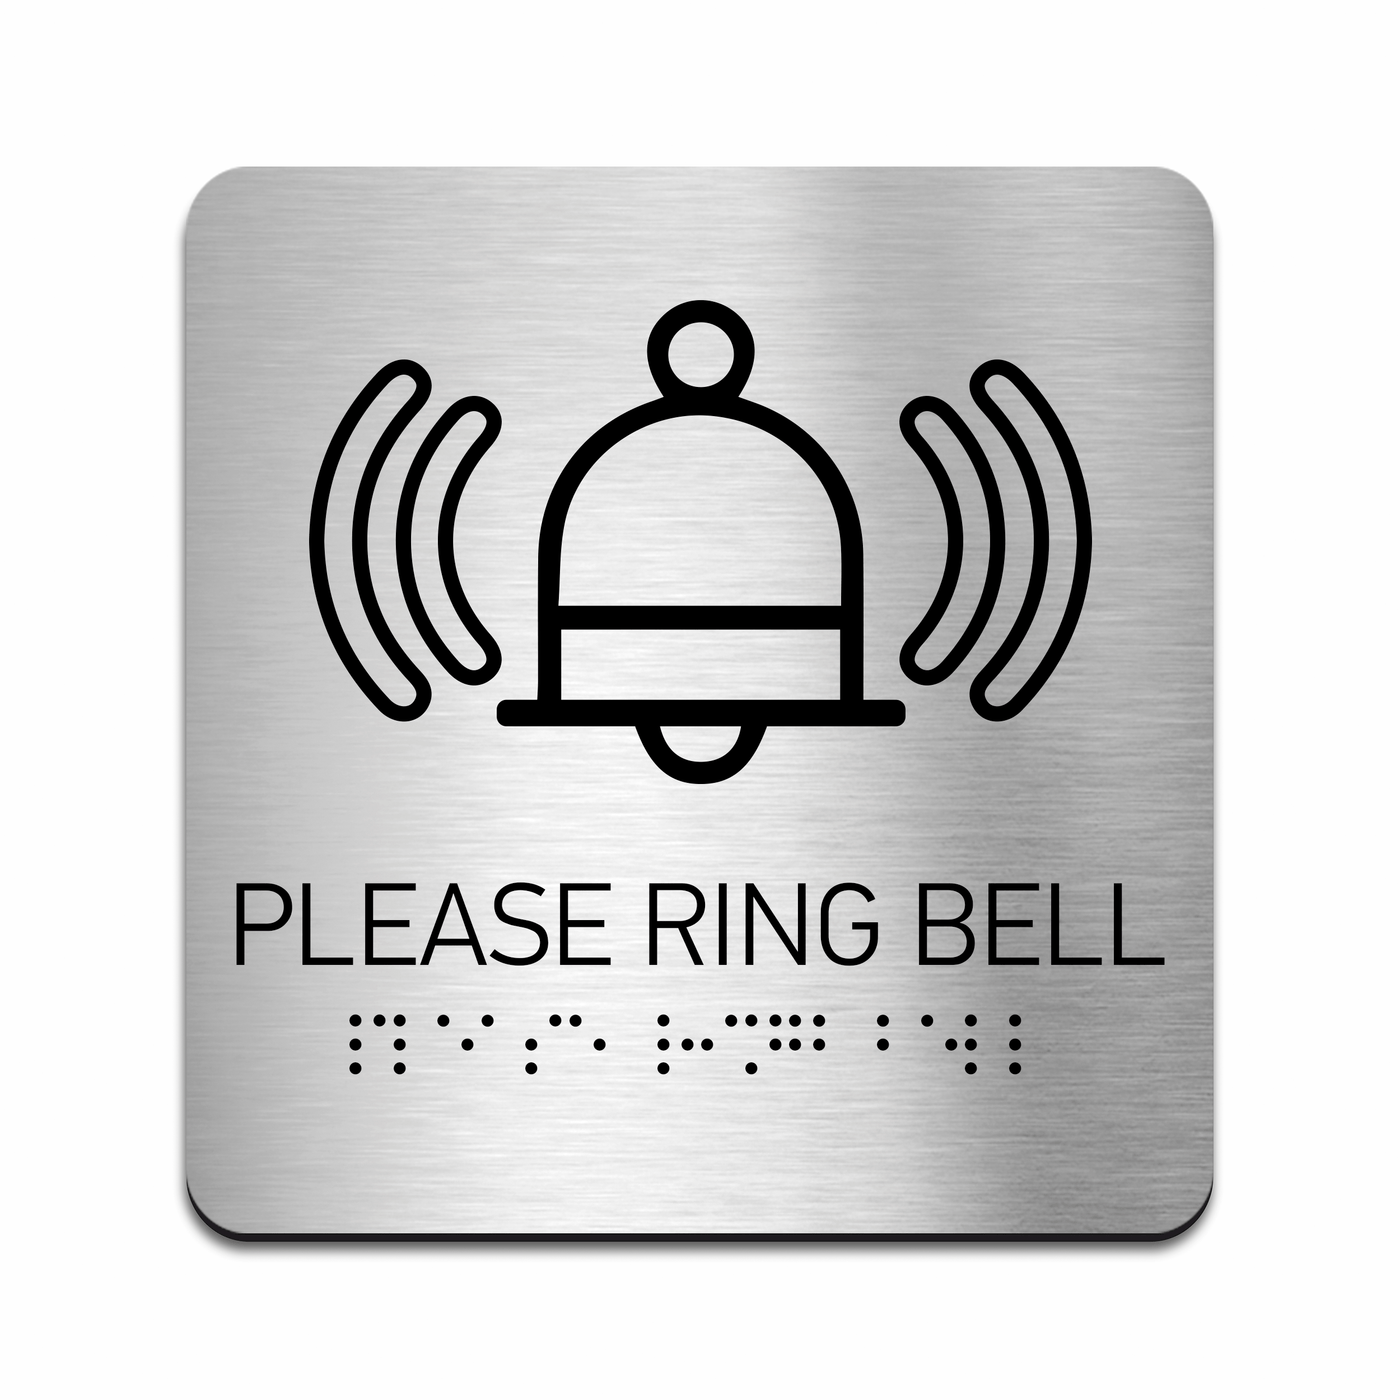 Information Signs - Please Ring Bell Sign - Steel Sign